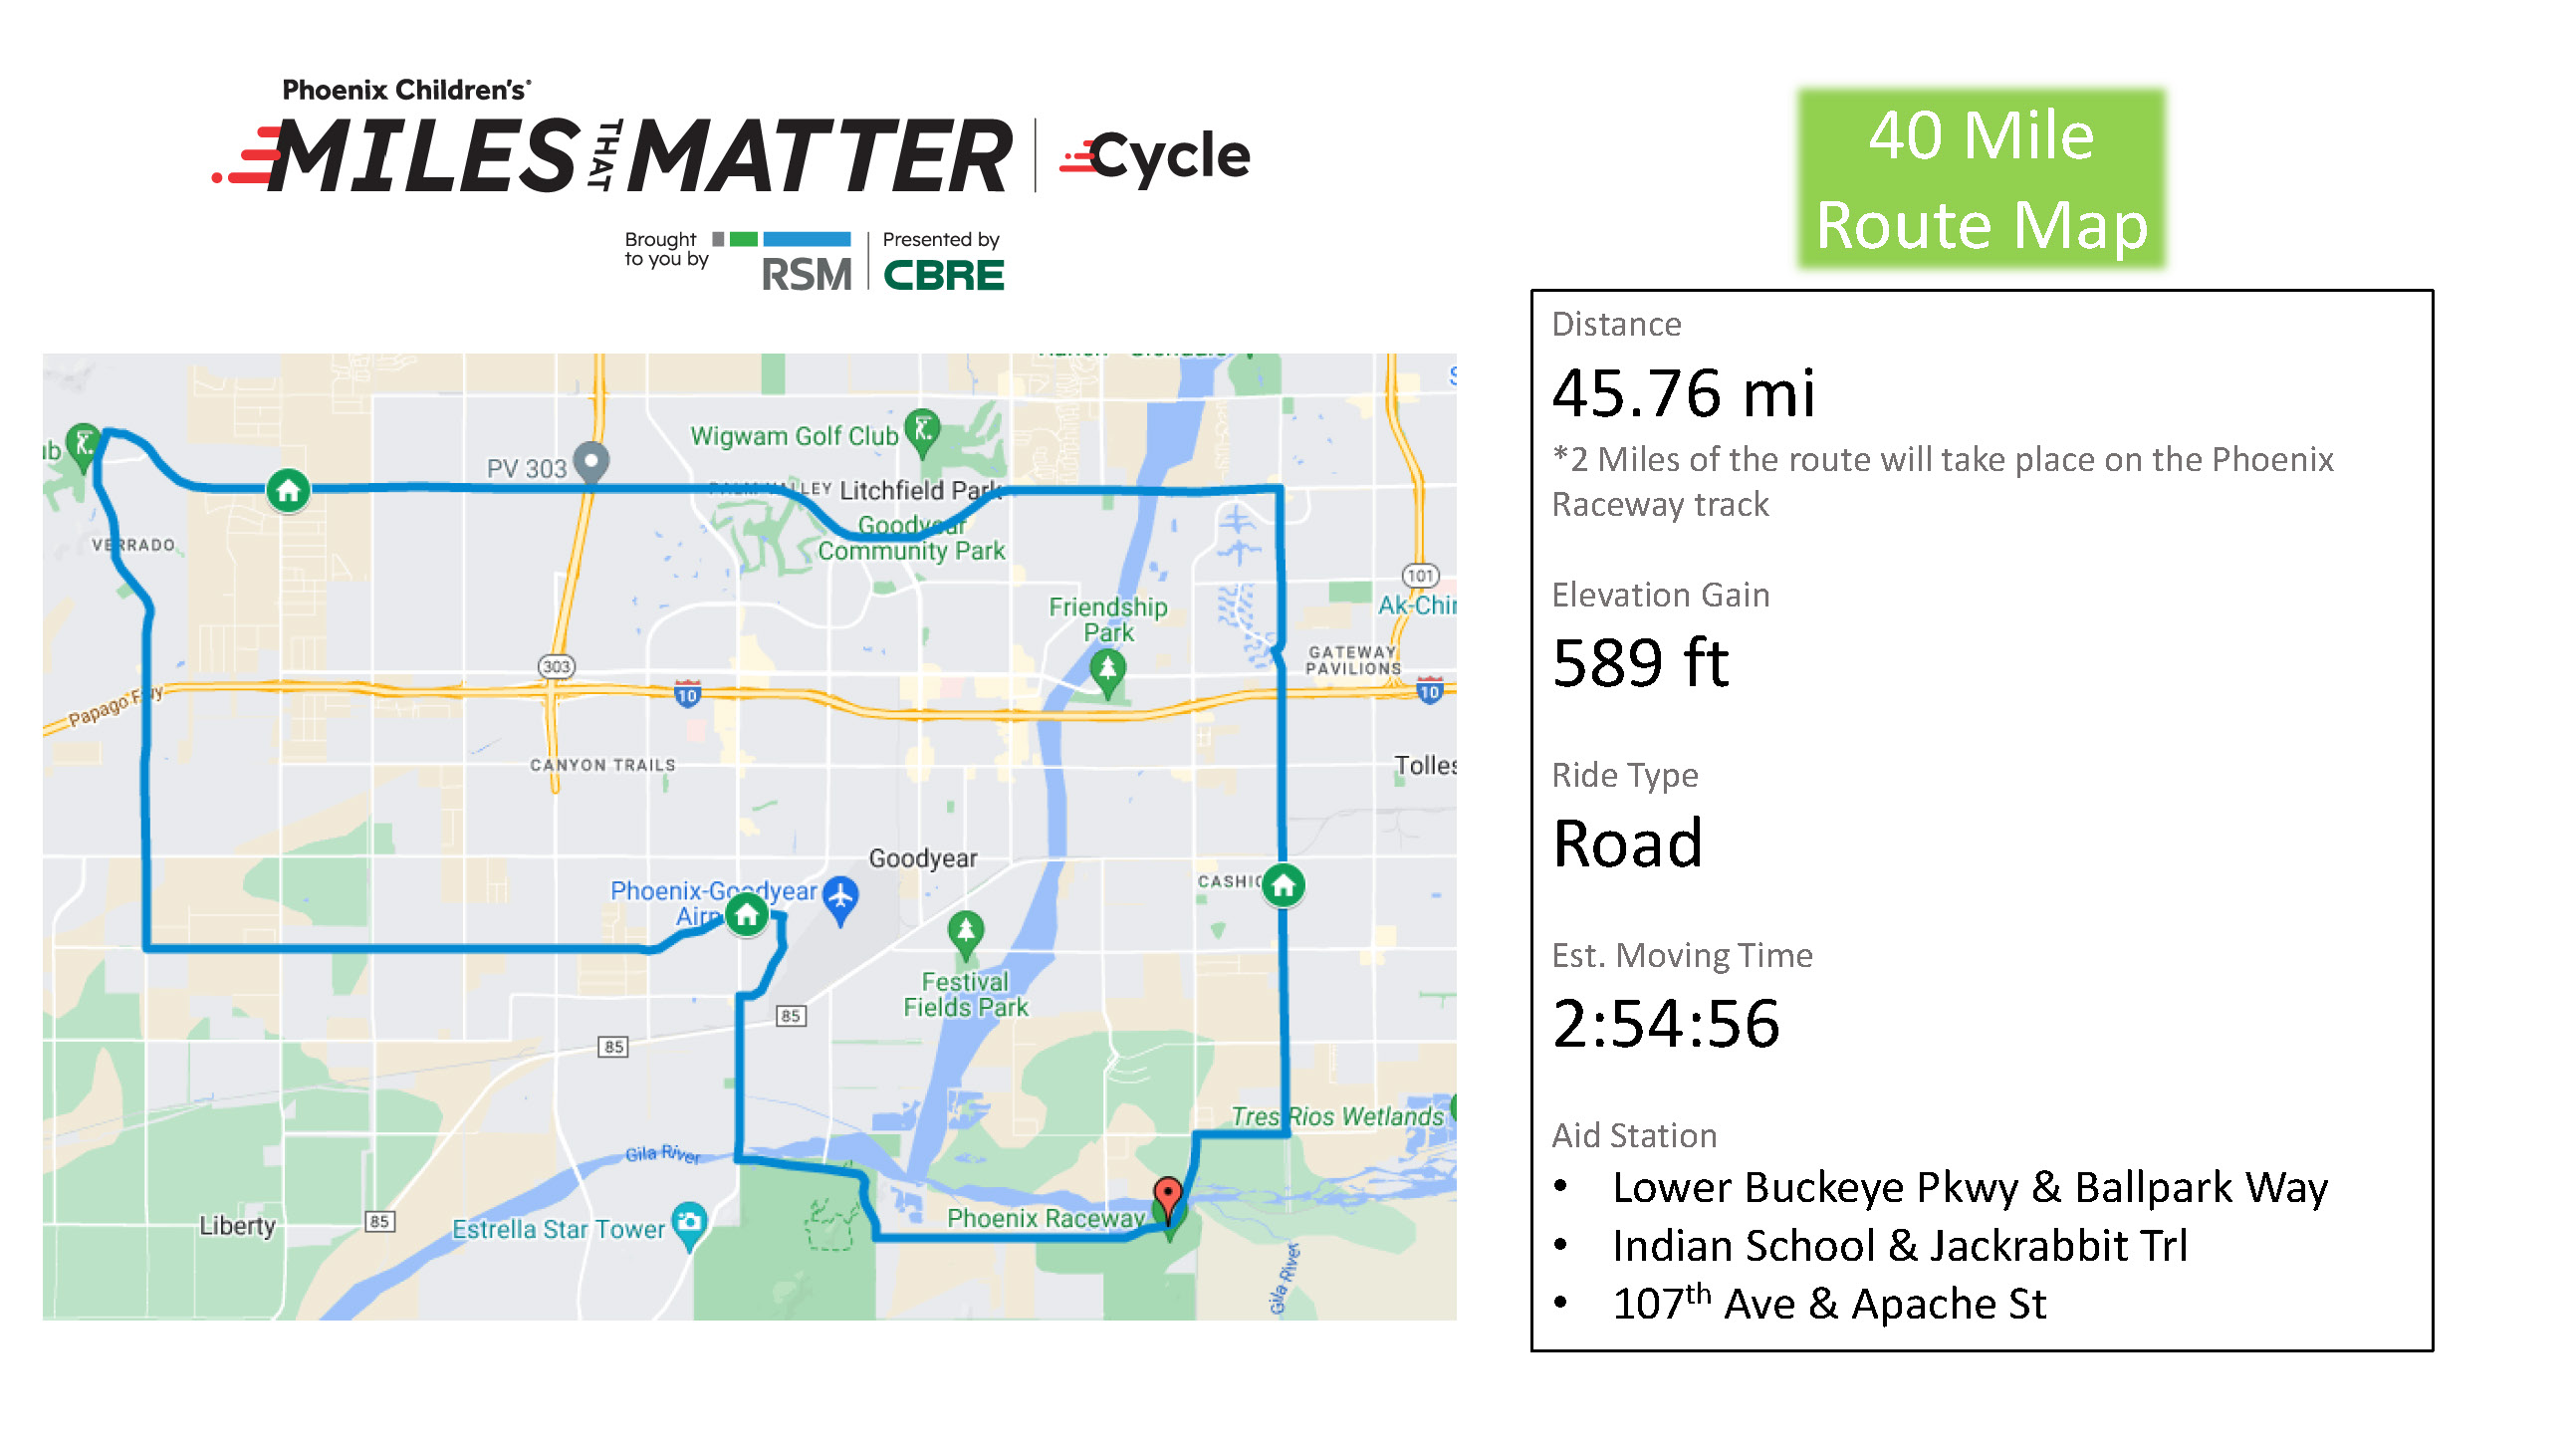 MTM Cycle 40 mile route map